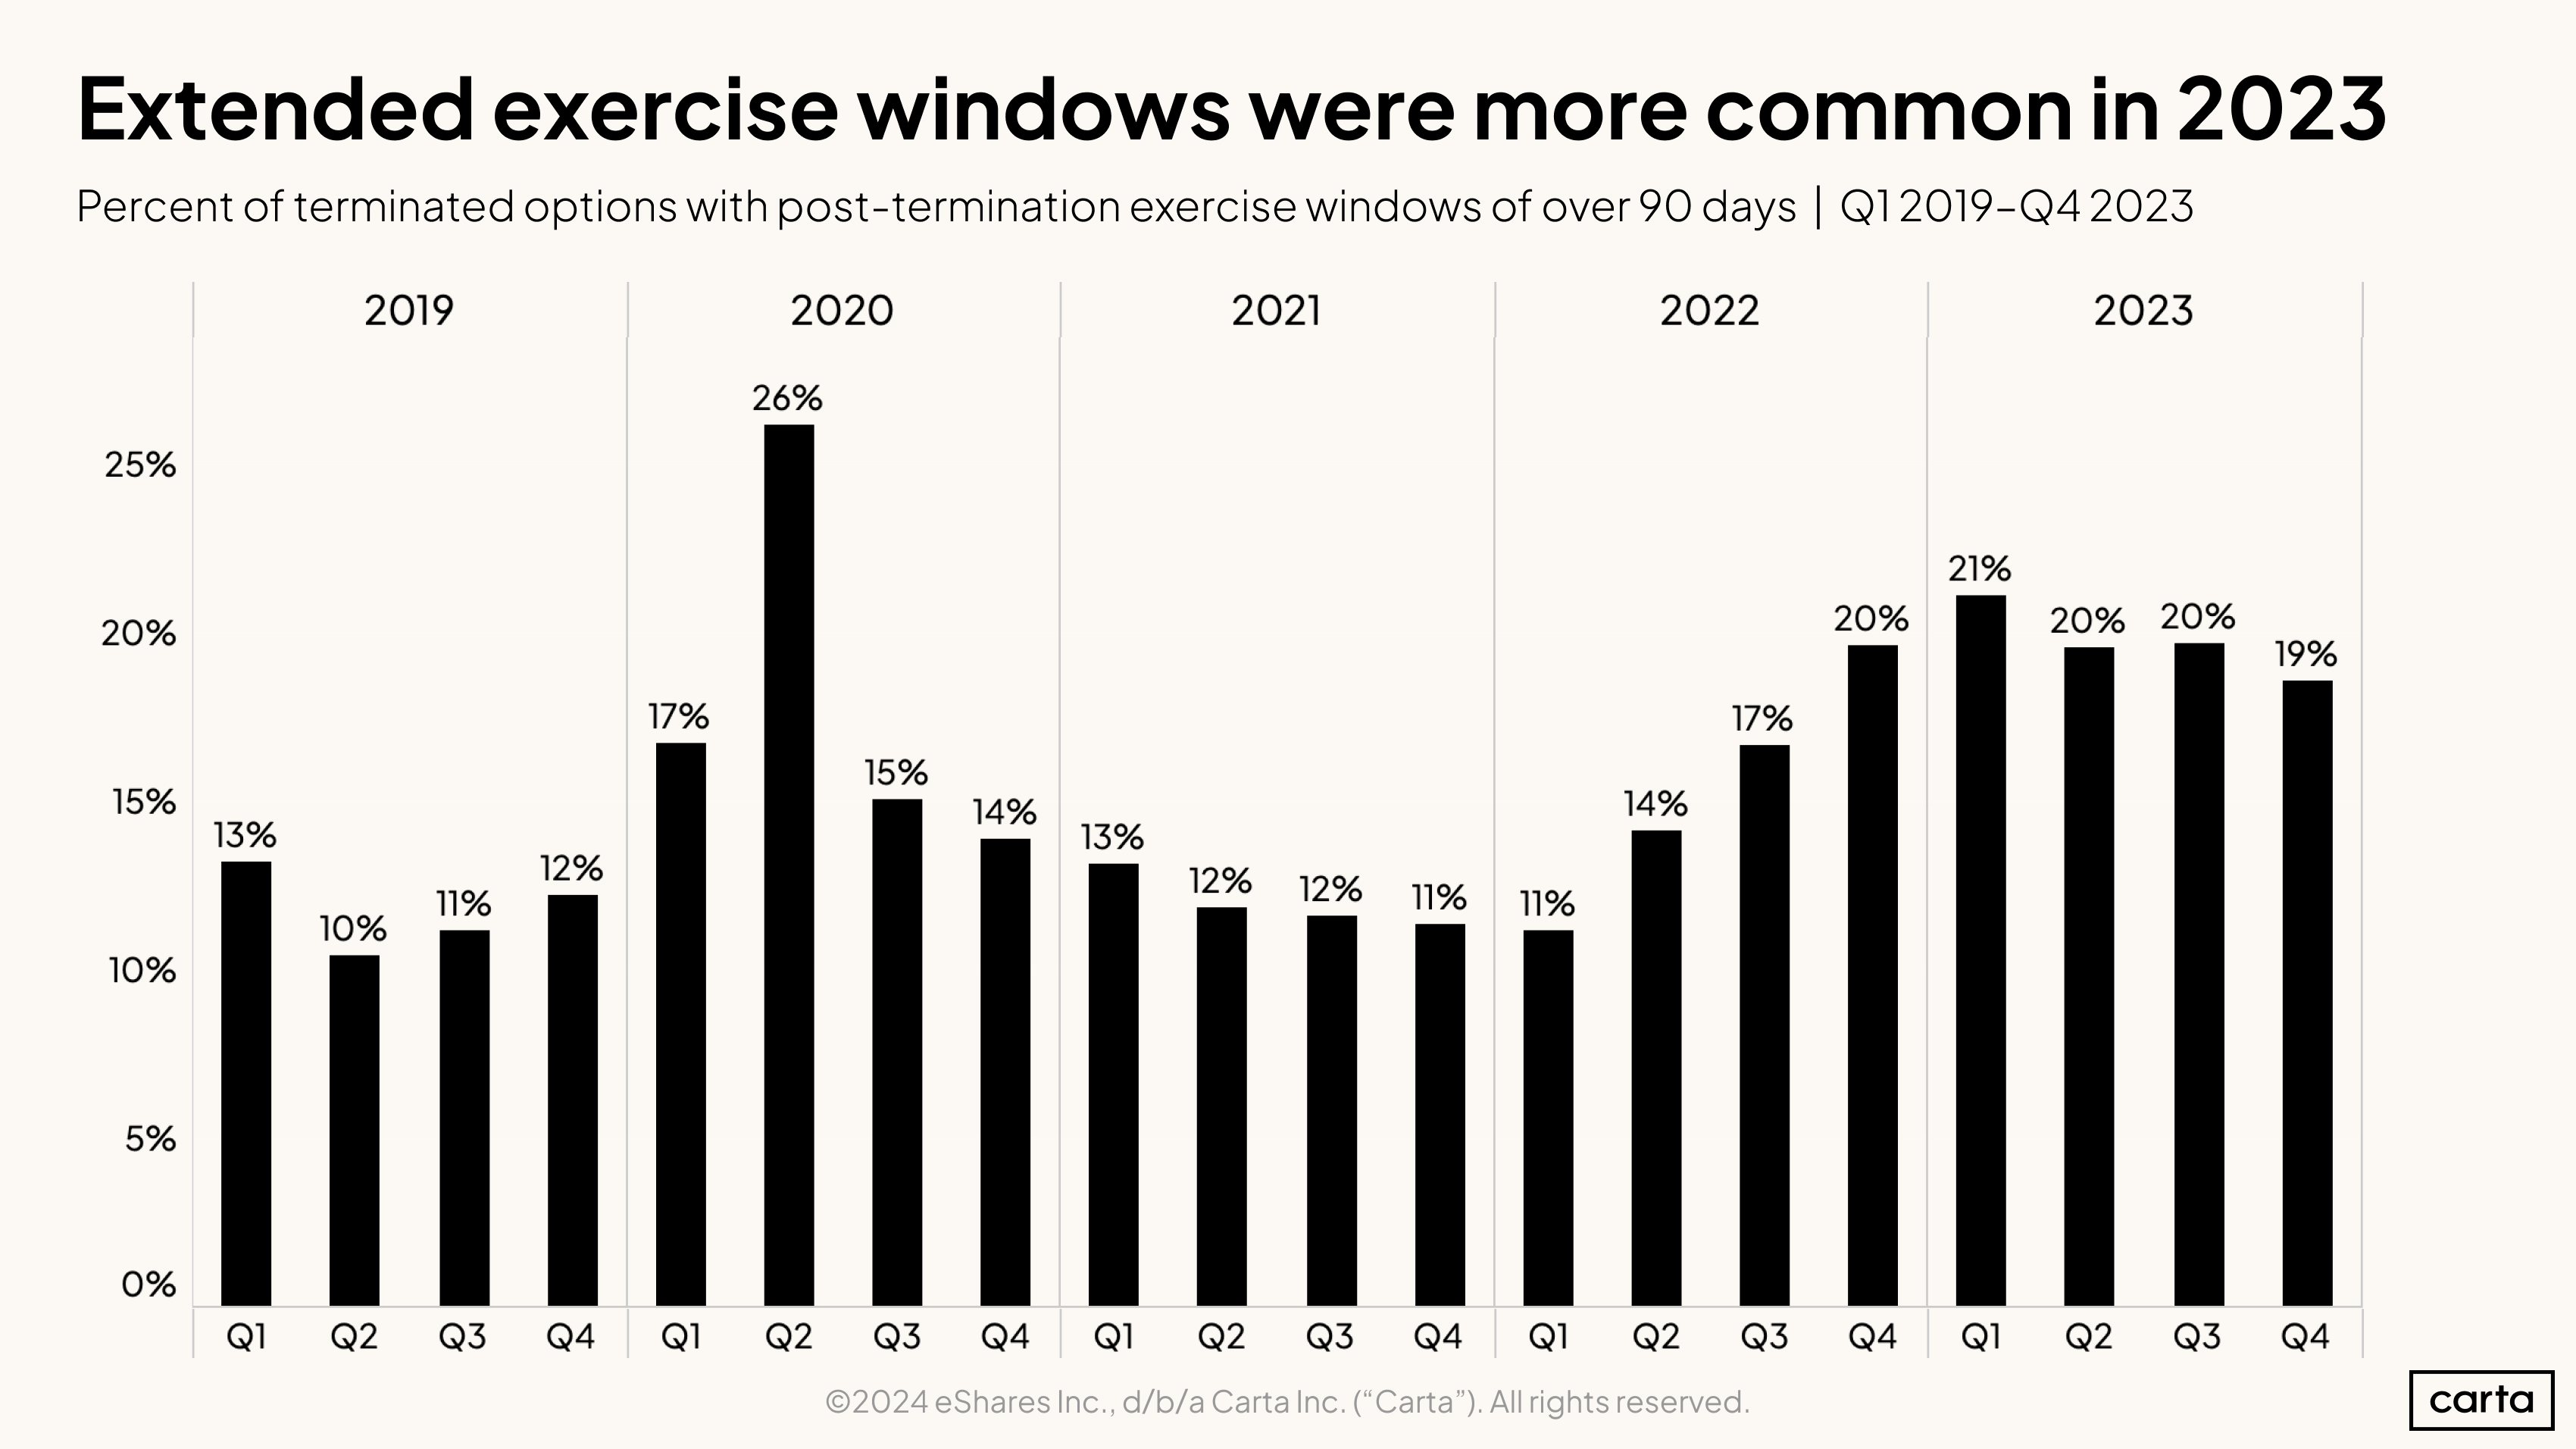 Extended exercise windows were more common in 2023